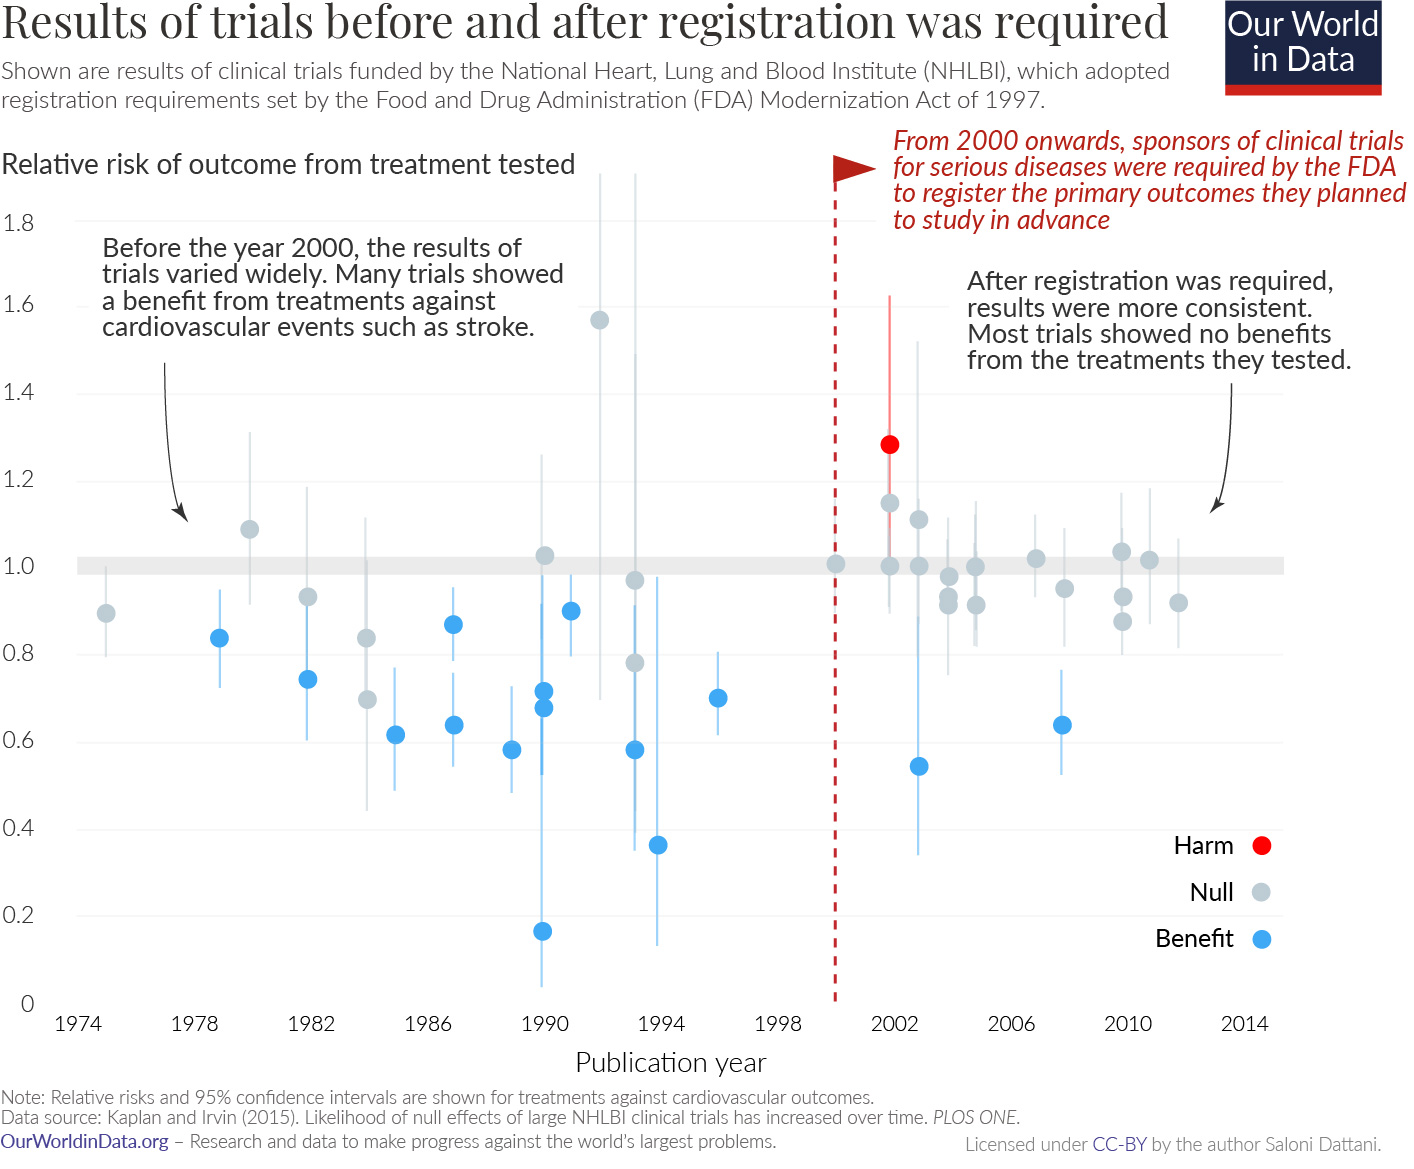 Graph from OurWorldInData, showing the results of trials funded by the National Heart, Lung, and Blood institute.  Before preregistration was required in 2000, most trials showed a substantial benefit.  After 2000, most trials show a small and insignificant effect.